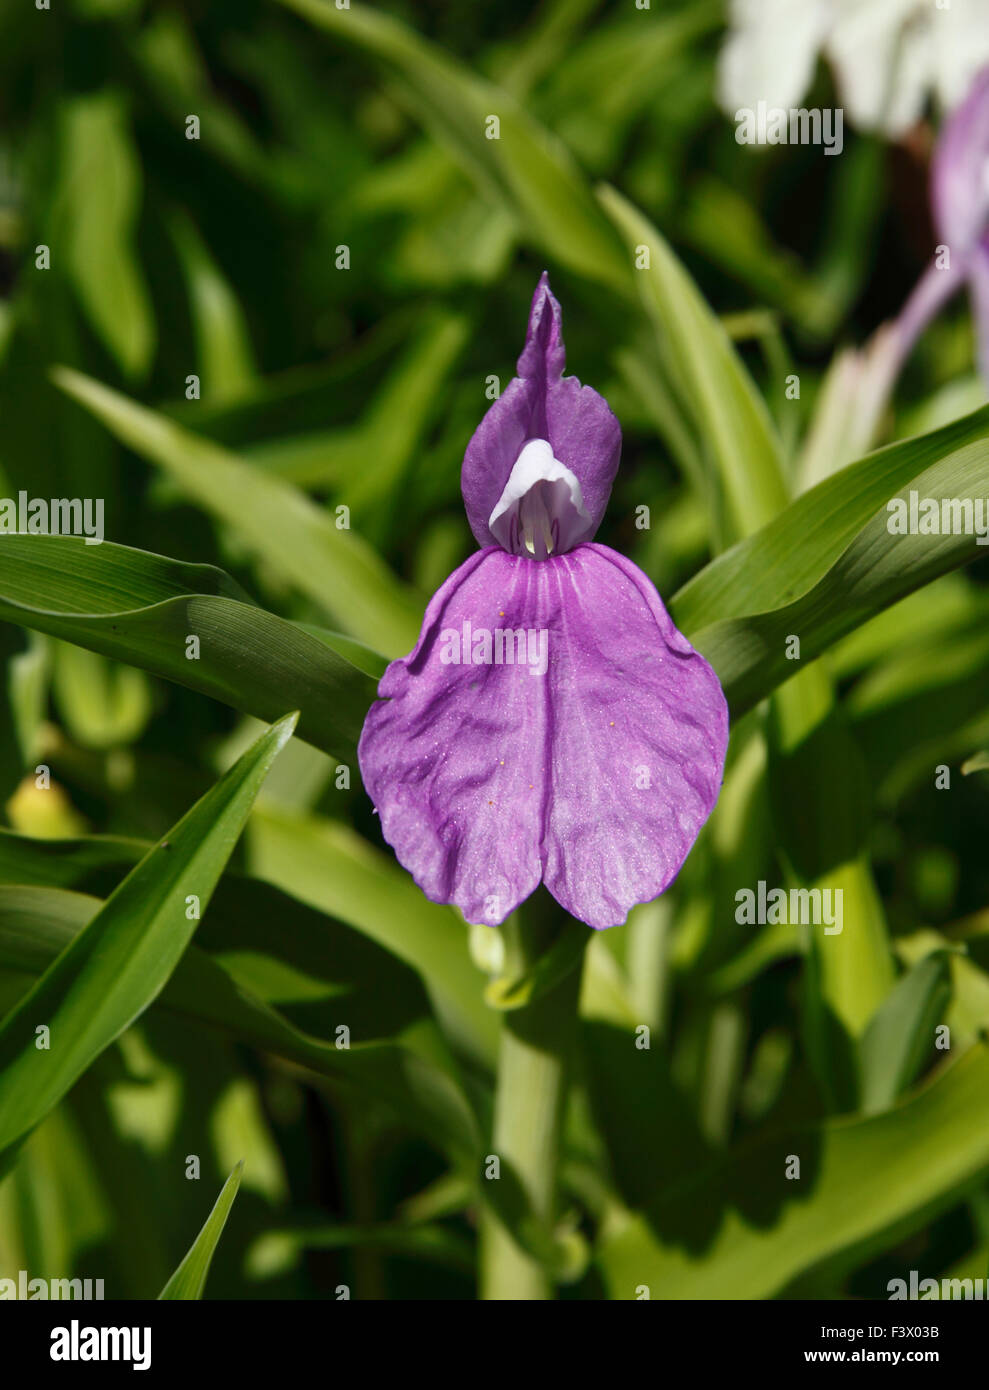 Roscoea cultivars close up of flowers Stock Photo